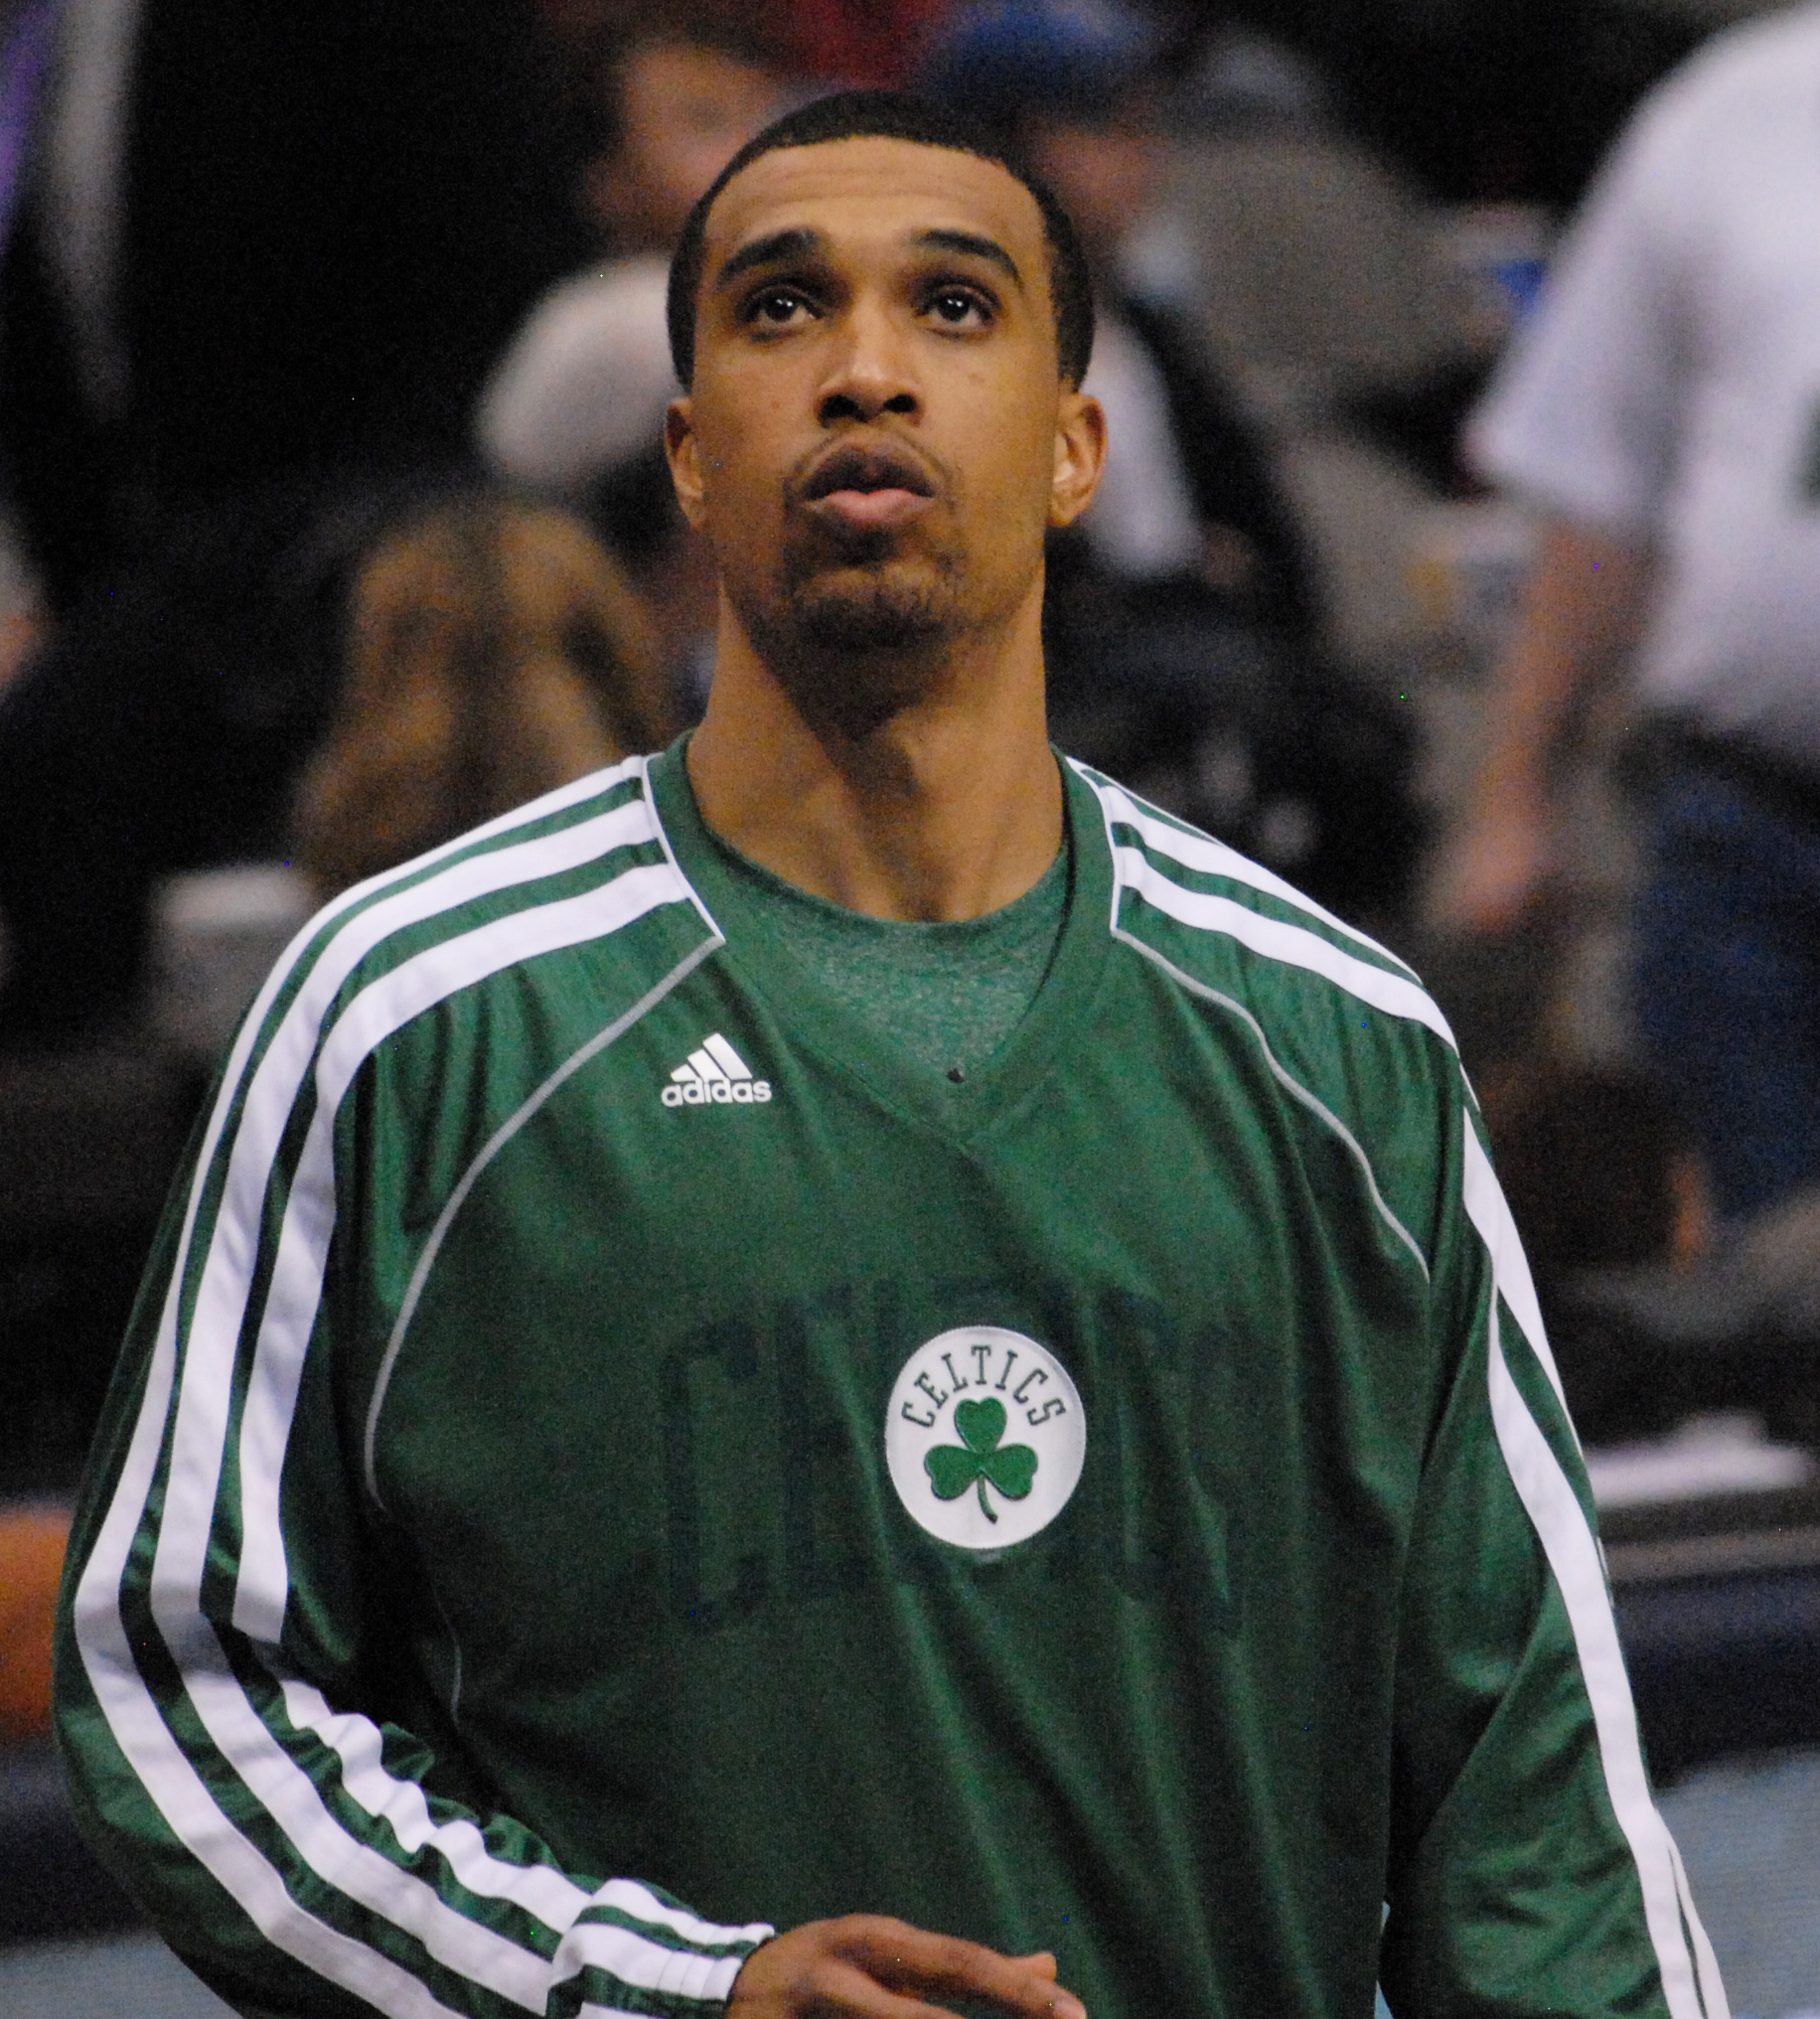 Courtney Lee, American basketball player was born on October 3, 1985.